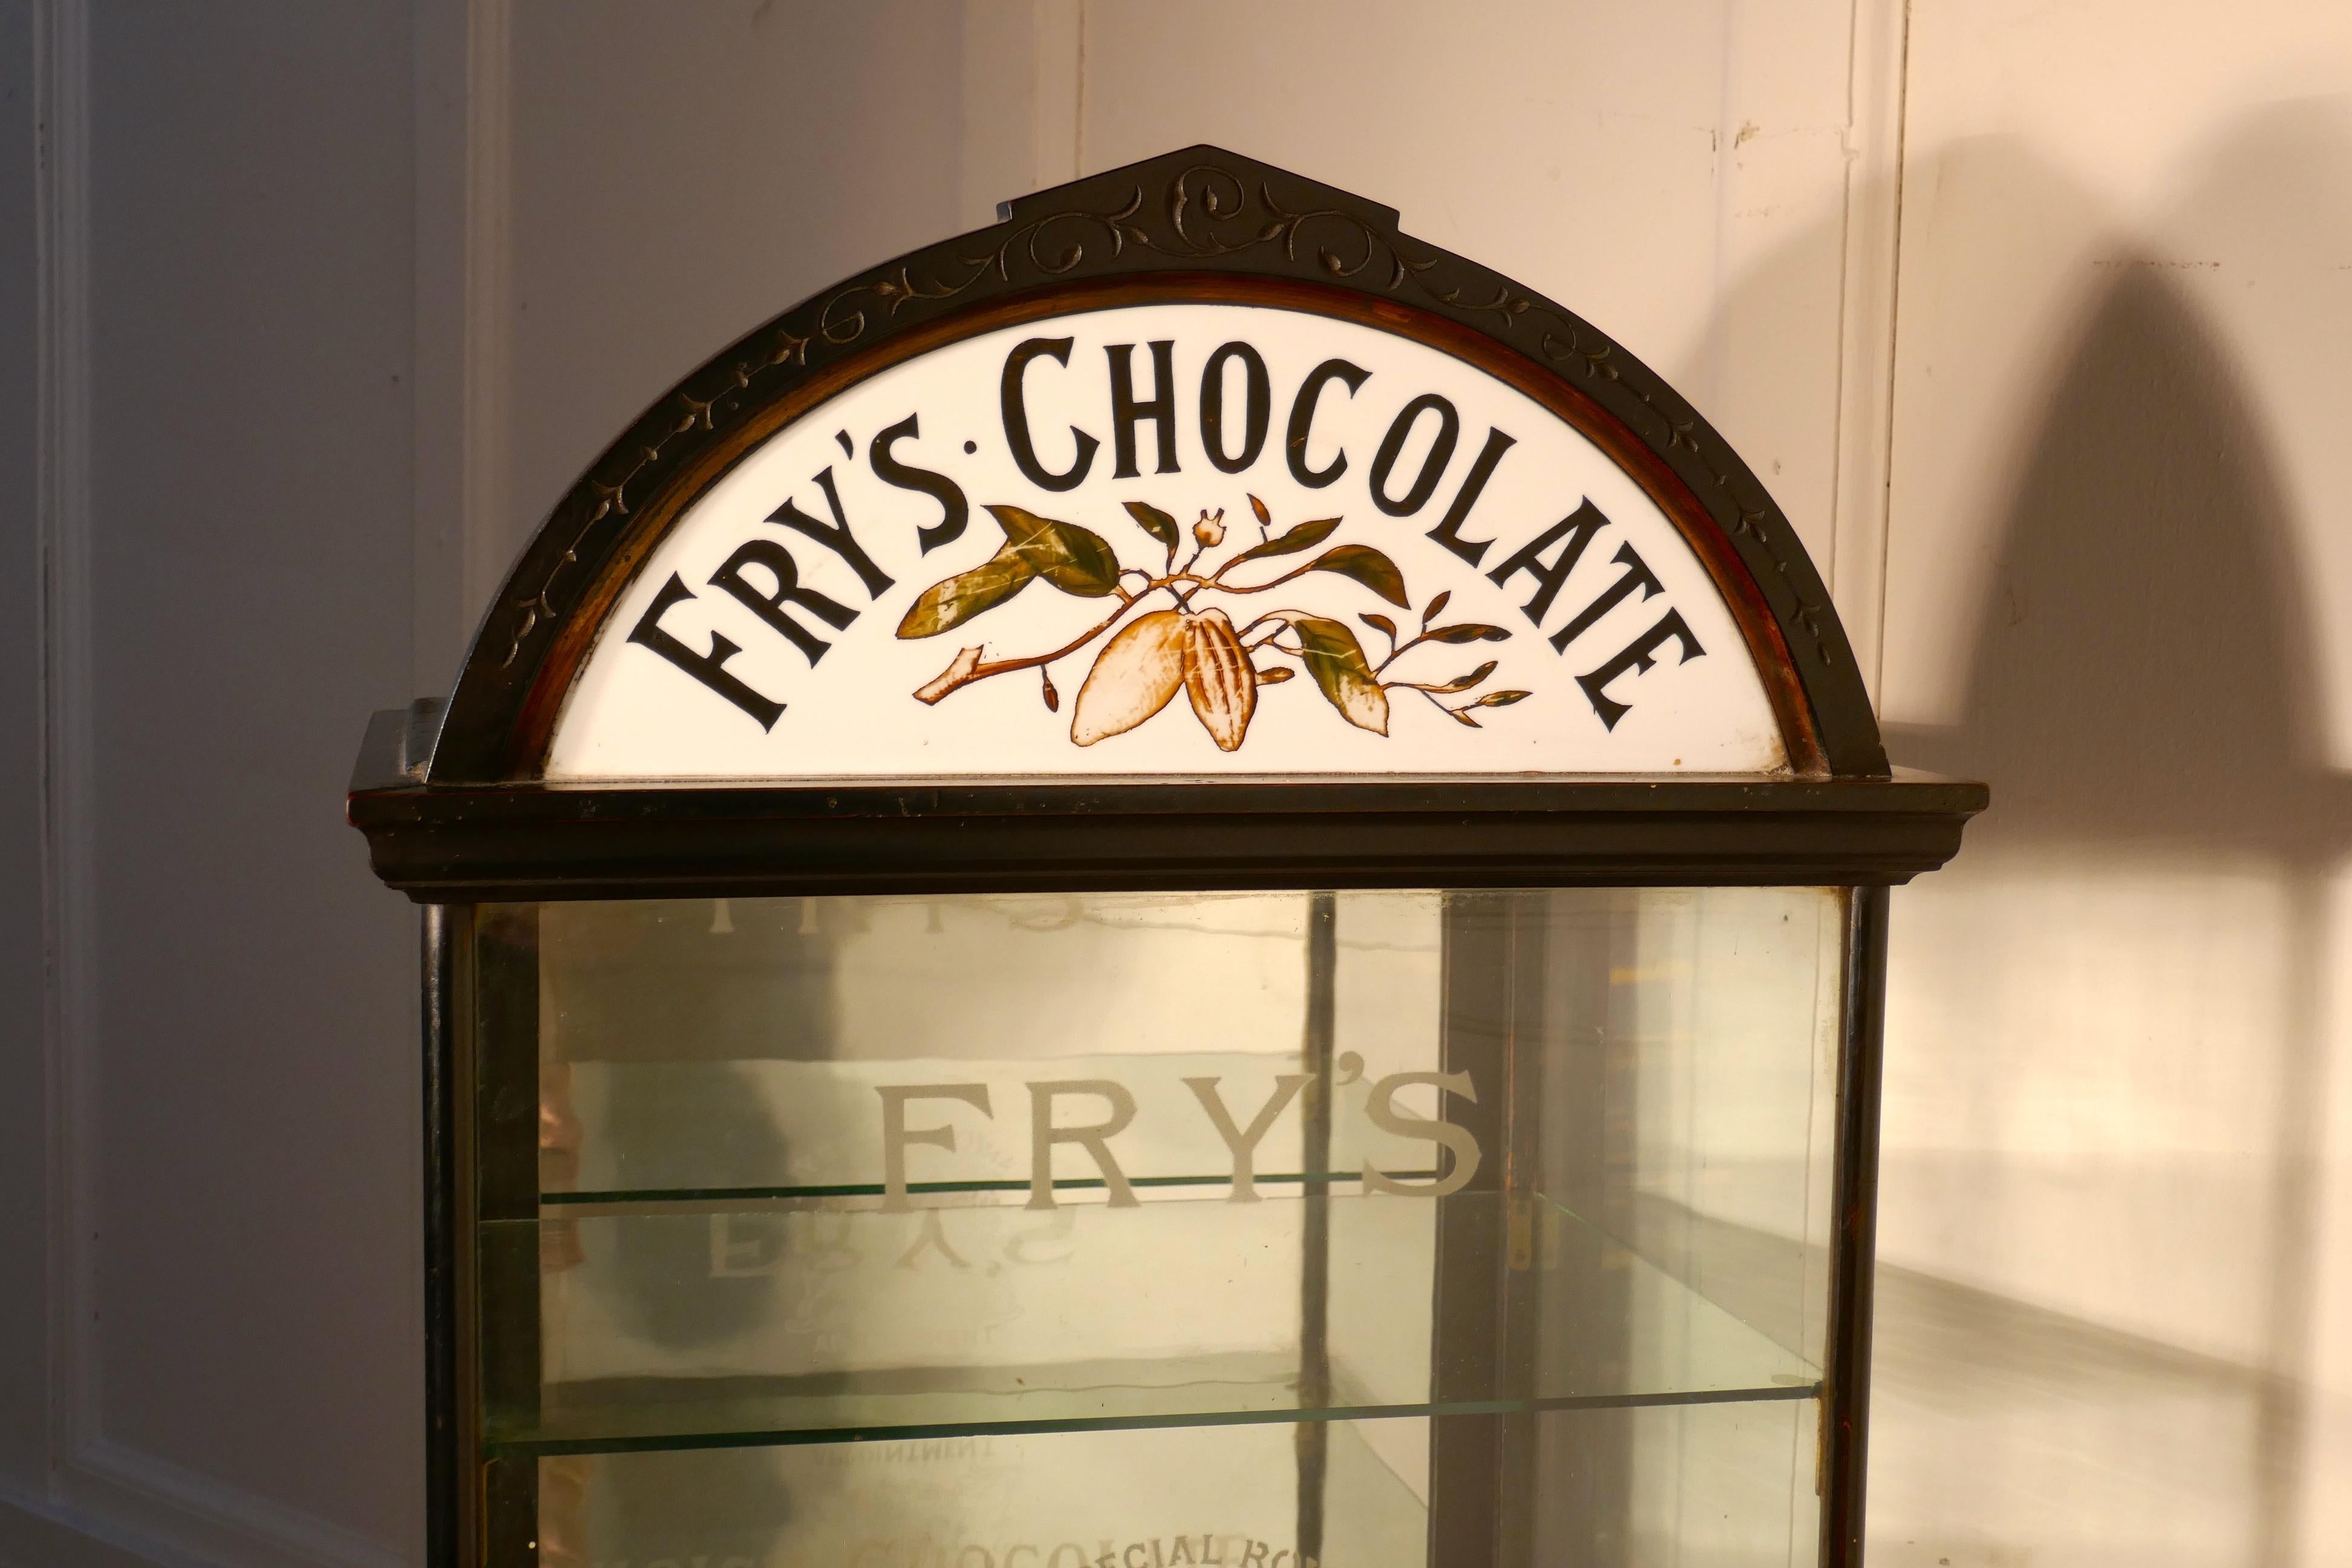 Fry’s chocolate sweet shop display cabinet, by R Palmer Bristol

This glazed advertising shop display cabinet it has an ebonized finish, the cabinet has a rather grand arching cornice. The cornice is inset with a half moon etched glass painted and